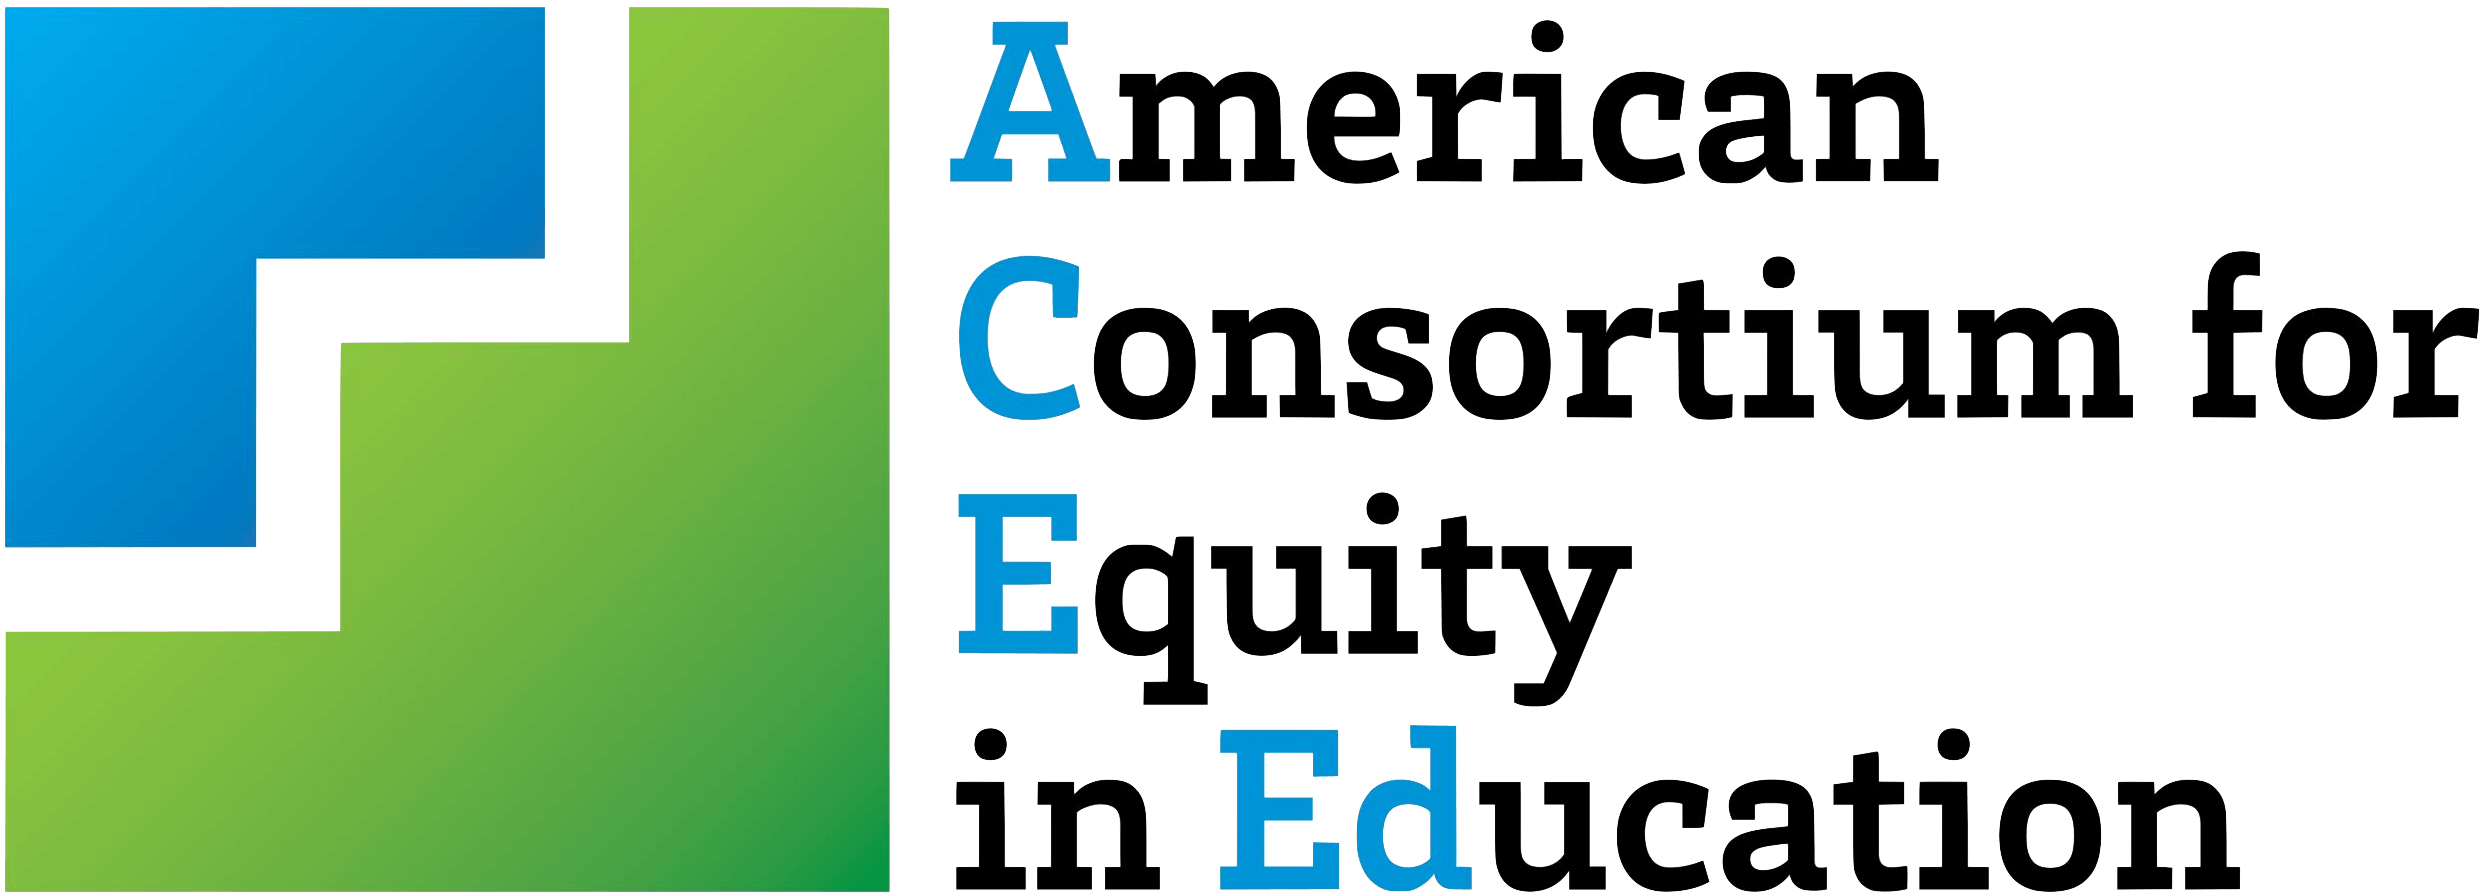 American Consortium for Equity in Education logo